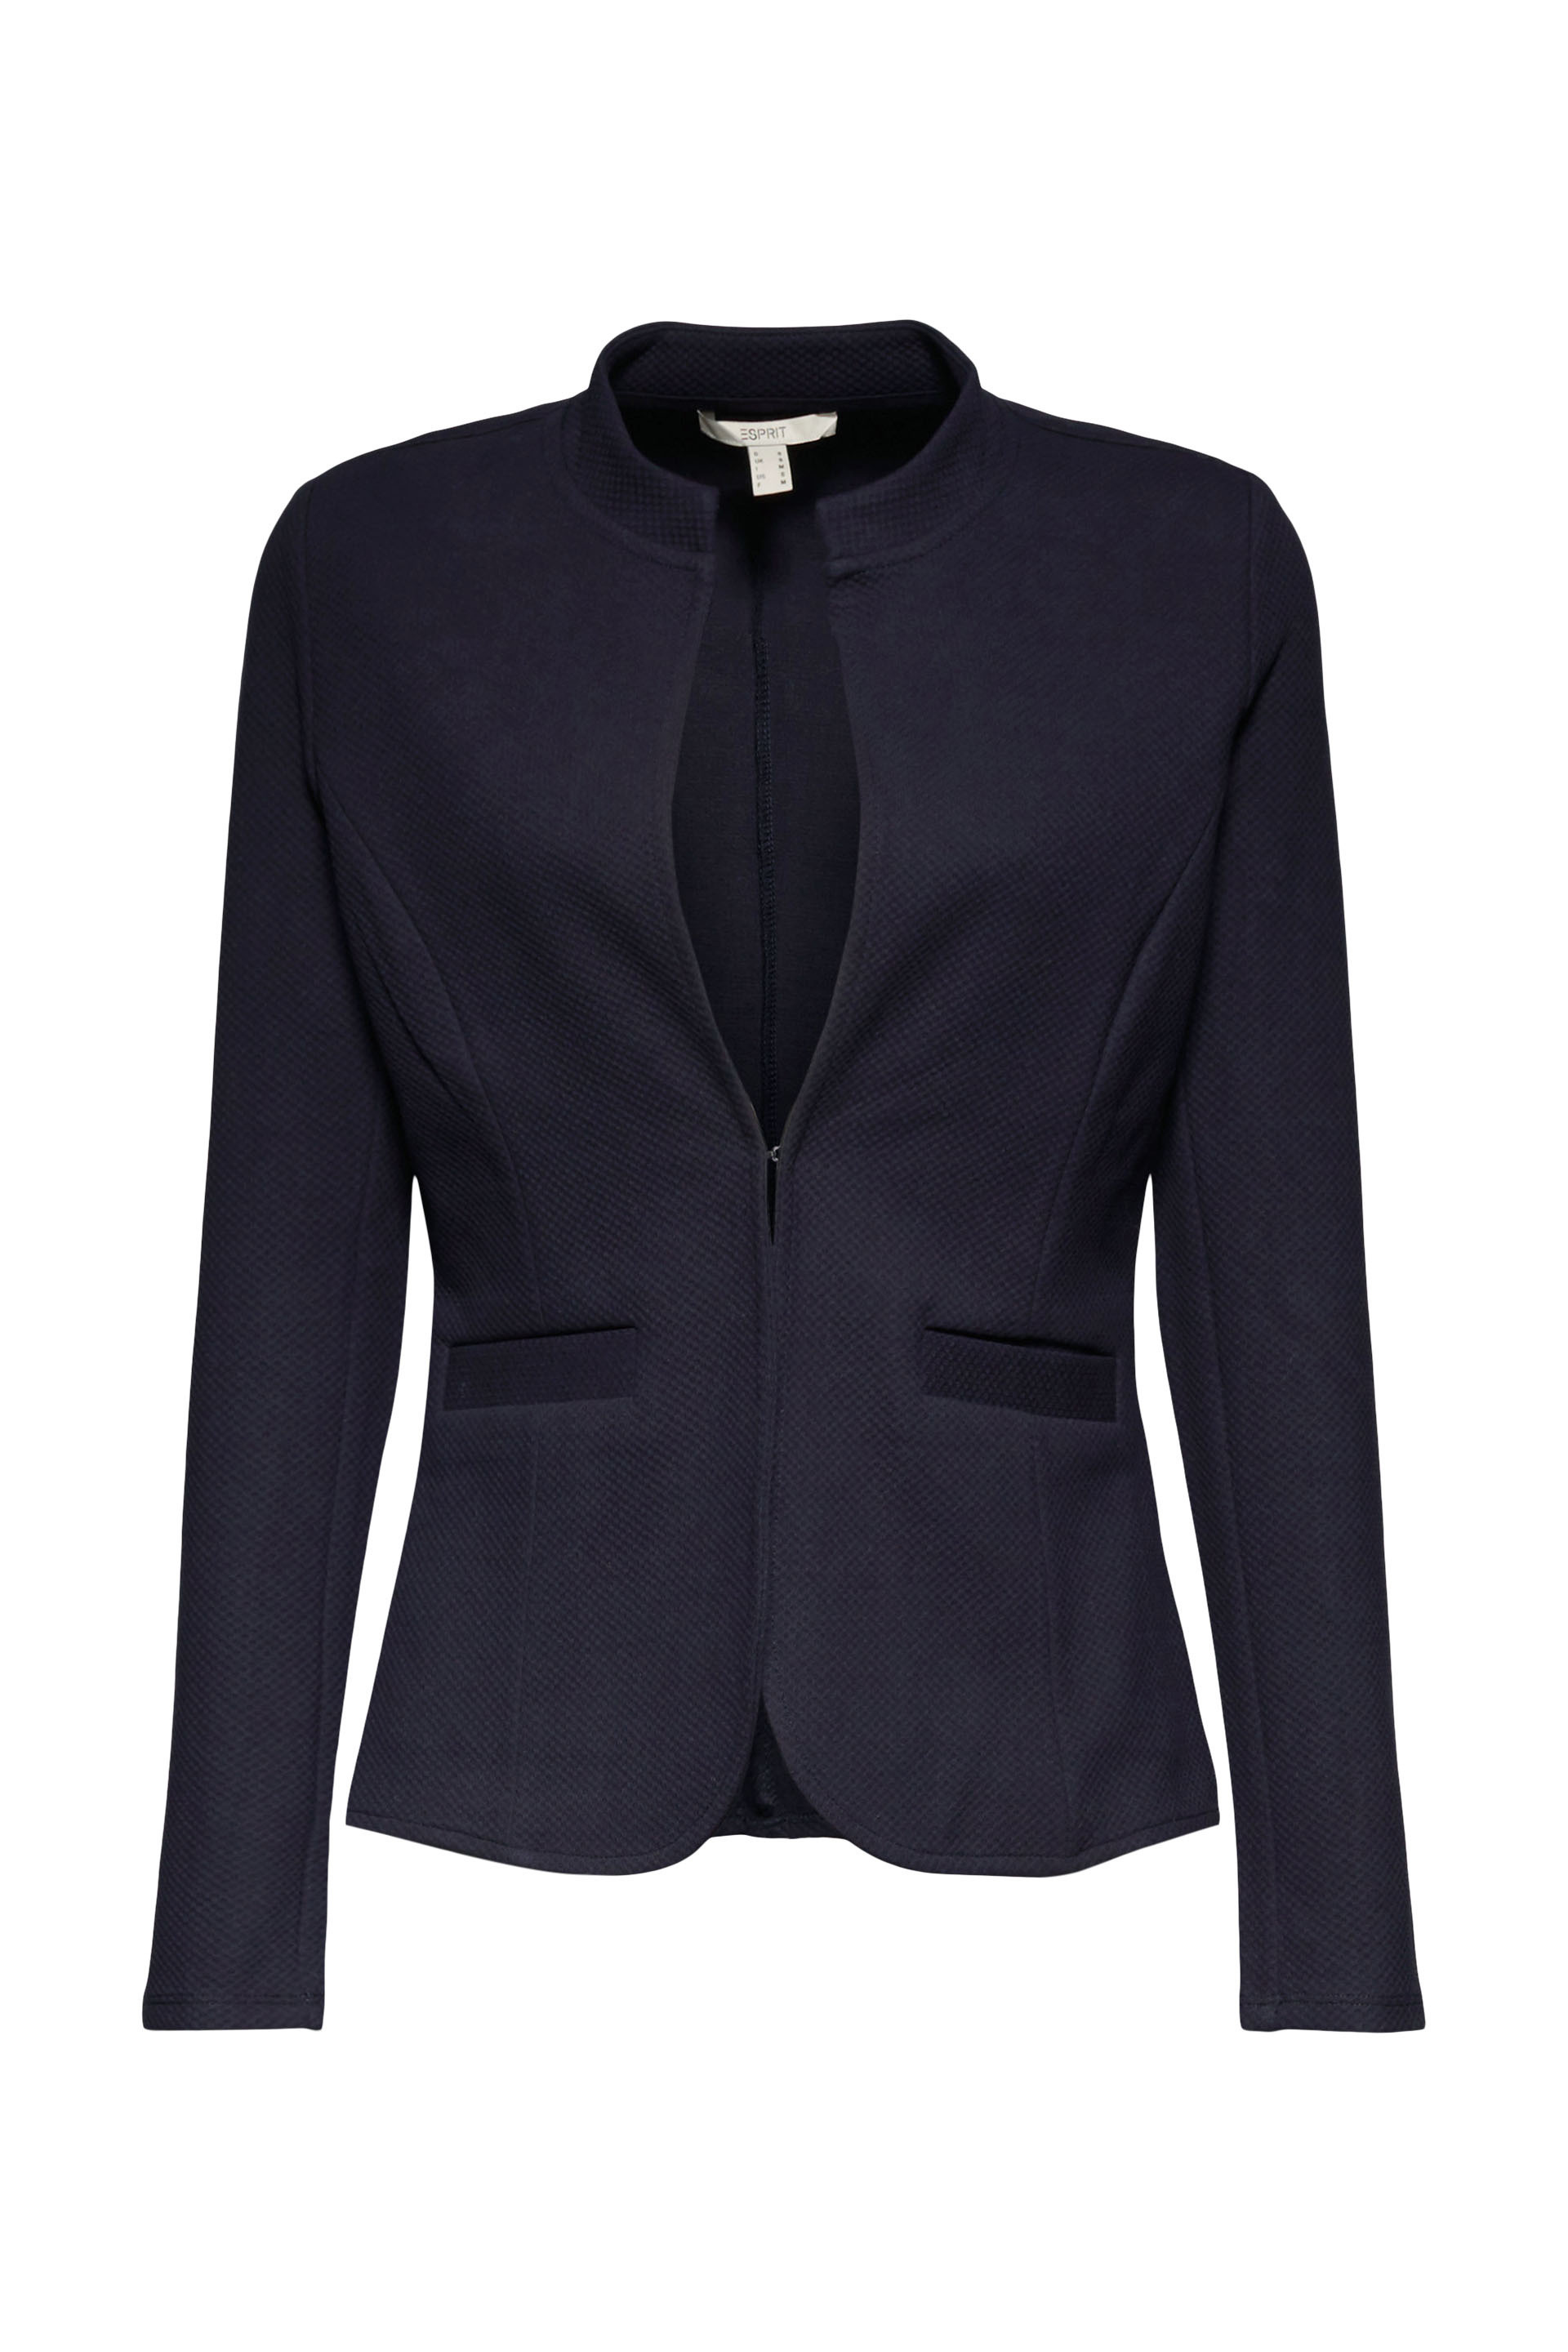 Blazer sciancrato in jersey, Blu, large image number 0